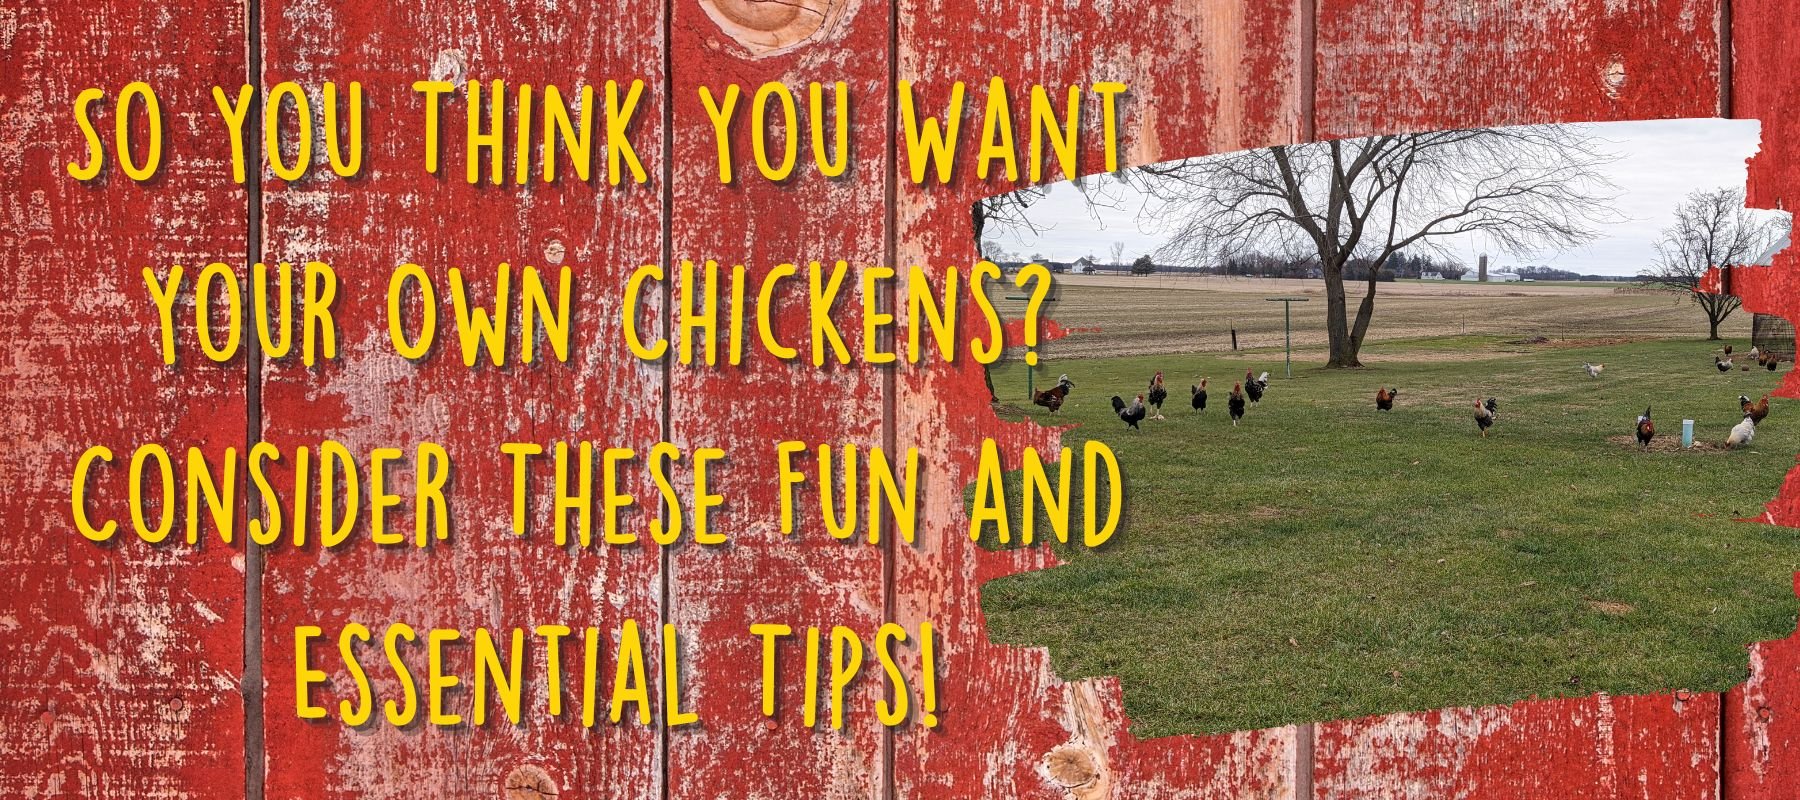 So You Think You Want Your Own Chickens? Consider These Fun and Essential Tips! - Cluck It All Farms